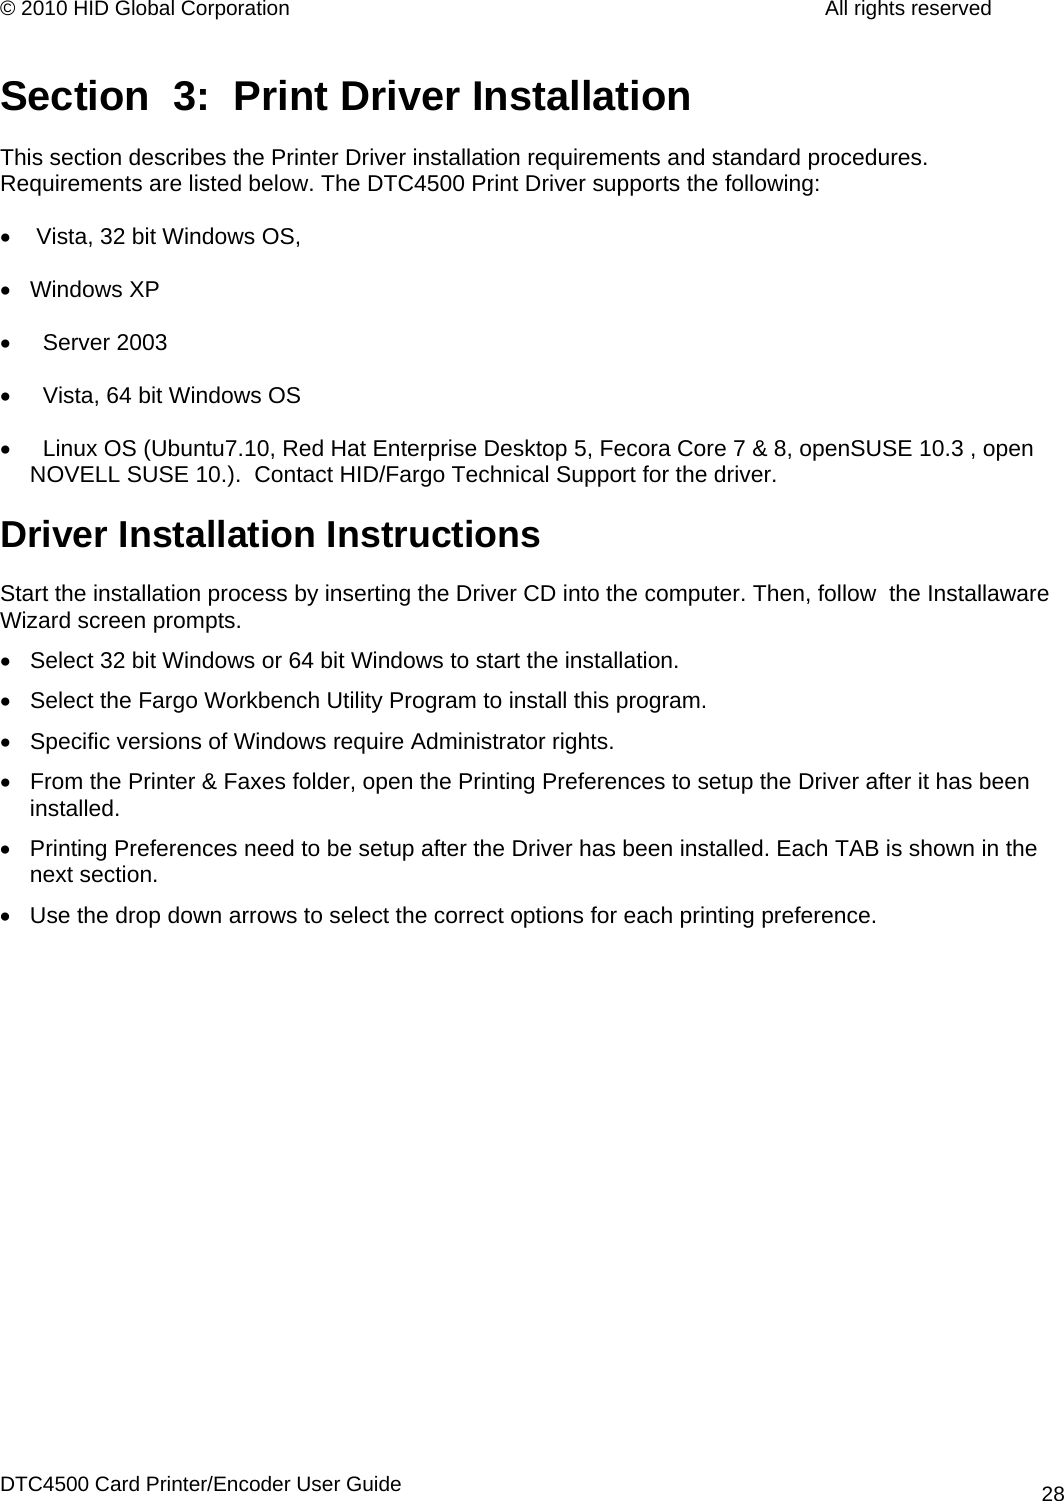 © 2010 HID Global Corporation         All rights reserved  Section  3:  Print Driver Installation This section describes the Printer Driver installation requirements and standard procedures. Requirements are listed below. The DTC4500 Print Driver supports the following: •   Vista, 32 bit Windows OS,  • Windows XP •    Server 2003 •    Vista, 64 bit Windows OS •    Linux OS (Ubuntu7.10, Red Hat Enterprise Desktop 5, Fecora Core 7 &amp; 8, openSUSE 10.3 , open                      NOVELL SUSE 10.).  Contact HID/Fargo Technical Support for the driver.  Driver Installation Instructions Start the installation process by inserting the Driver CD into the computer. Then, follow  the Installaware Wizard screen prompts. •  Select 32 bit Windows or 64 bit Windows to start the installation. •  Select the Fargo Workbench Utility Program to install this program. •  Specific versions of Windows require Administrator rights.  •  From the Printer &amp; Faxes folder, open the Printing Preferences to setup the Driver after it has been installed. •  Printing Preferences need to be setup after the Driver has been installed. Each TAB is shown in the next section.  •  Use the drop down arrows to select the correct options for each printing preference. DTC4500 Card Printer/Encoder User Guide 28